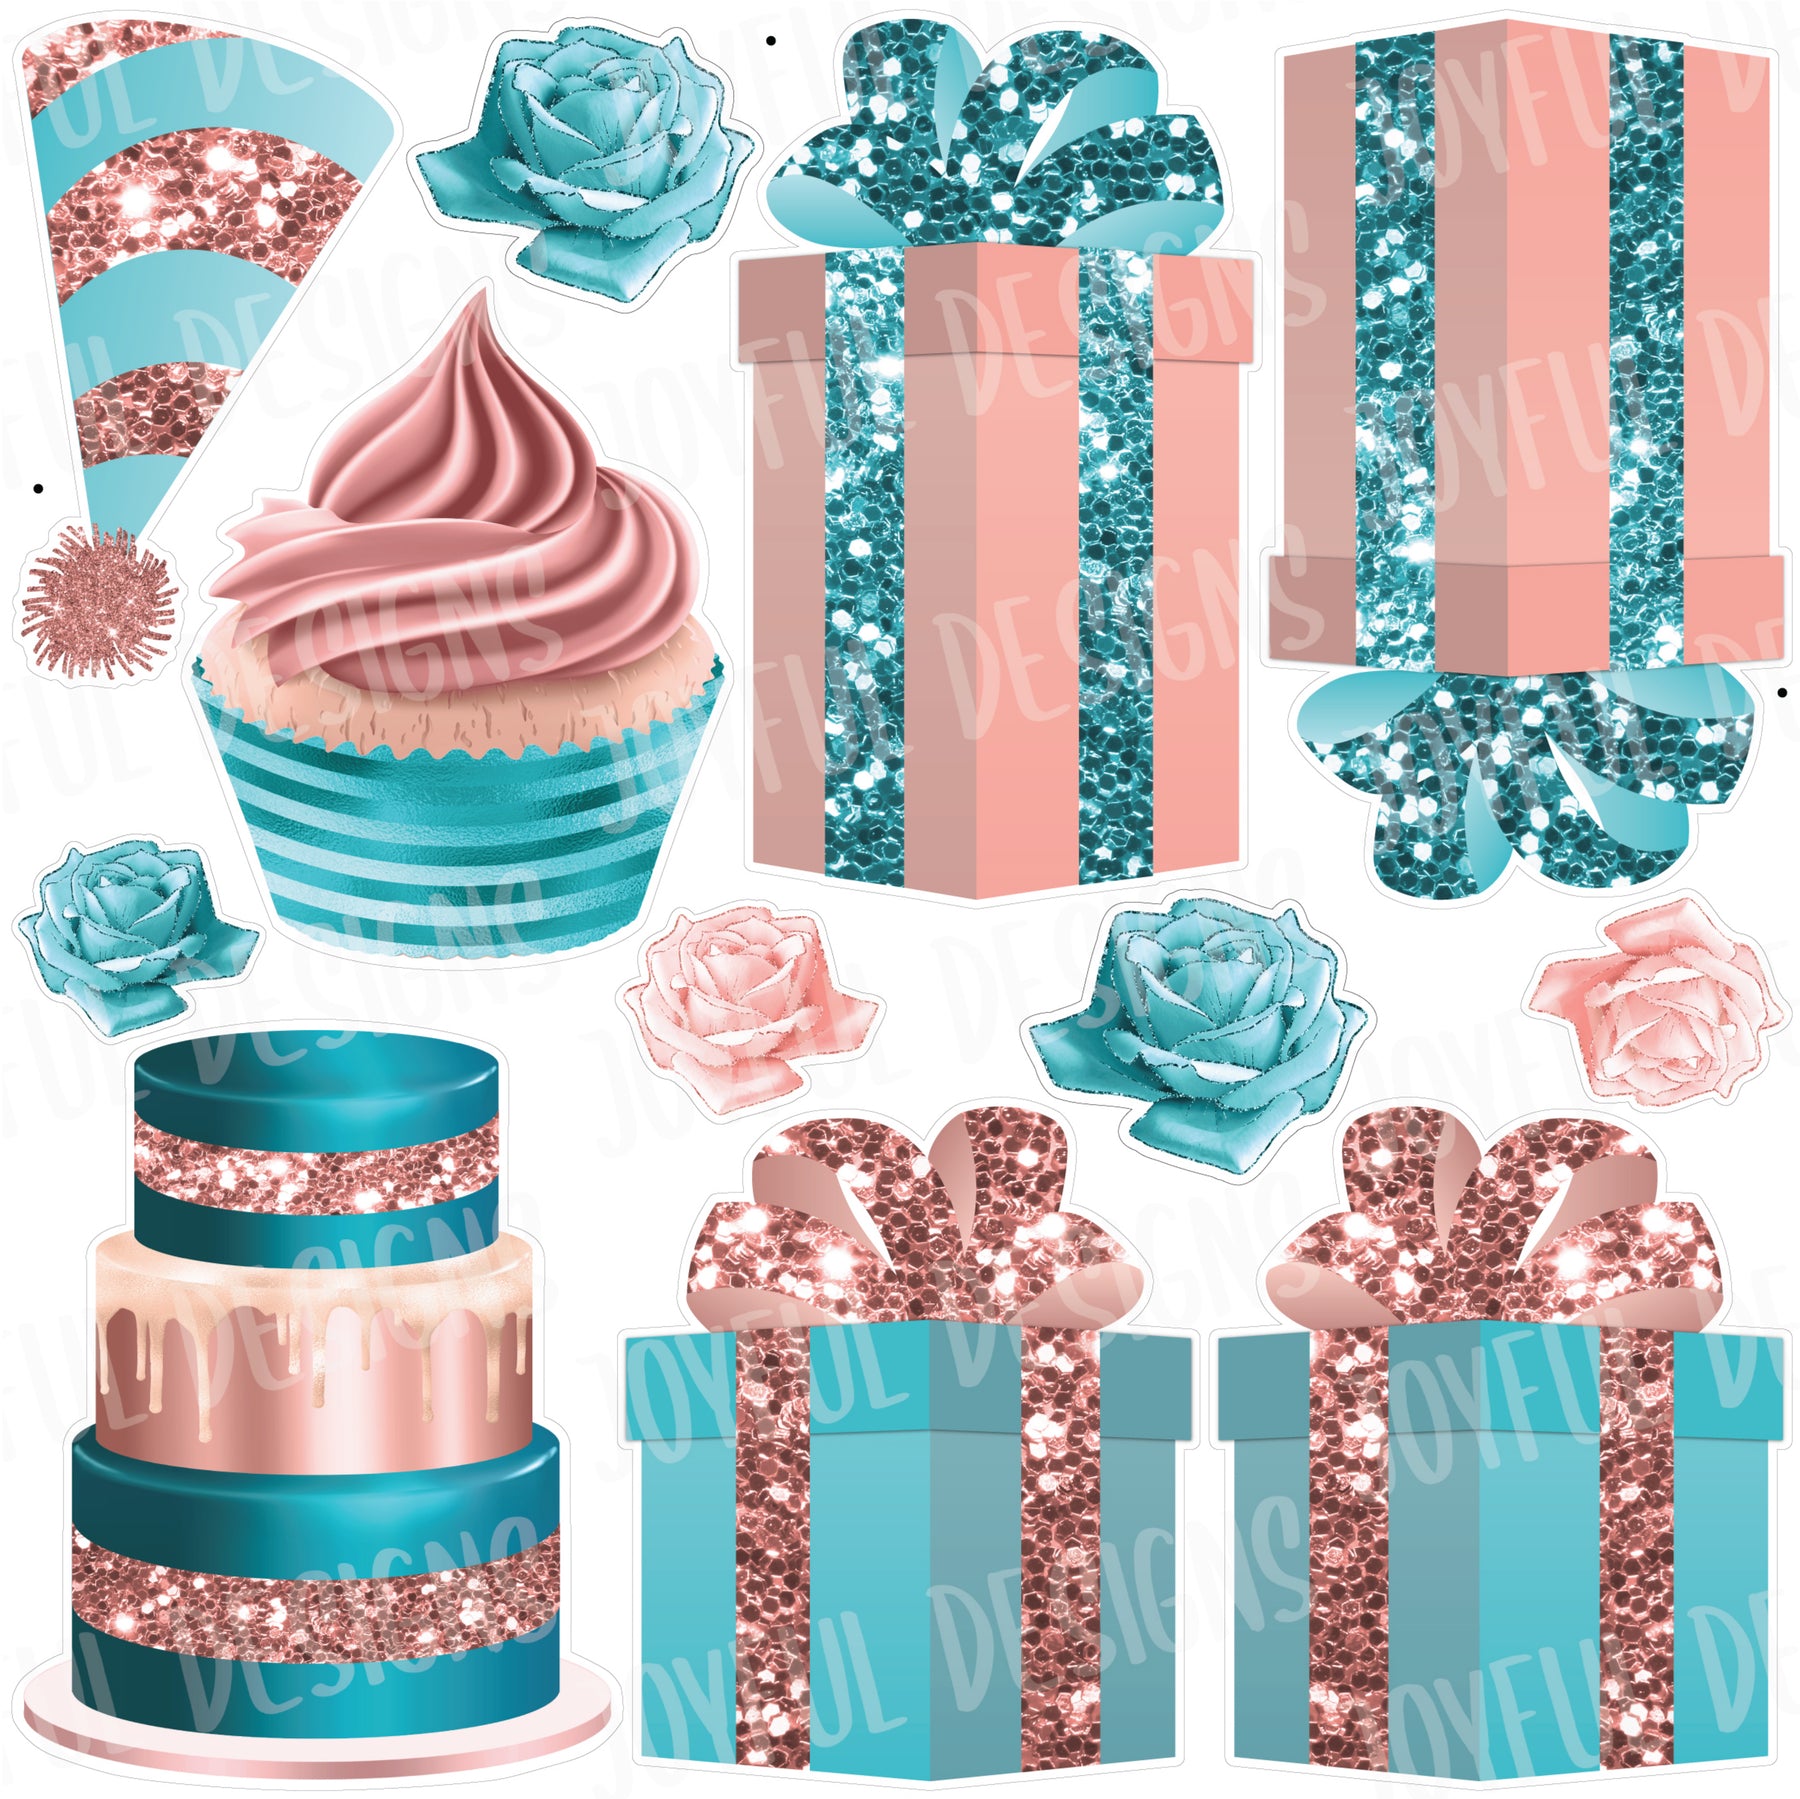 Rose and Tiffany Birthday Flair Half from "One and Done" Set